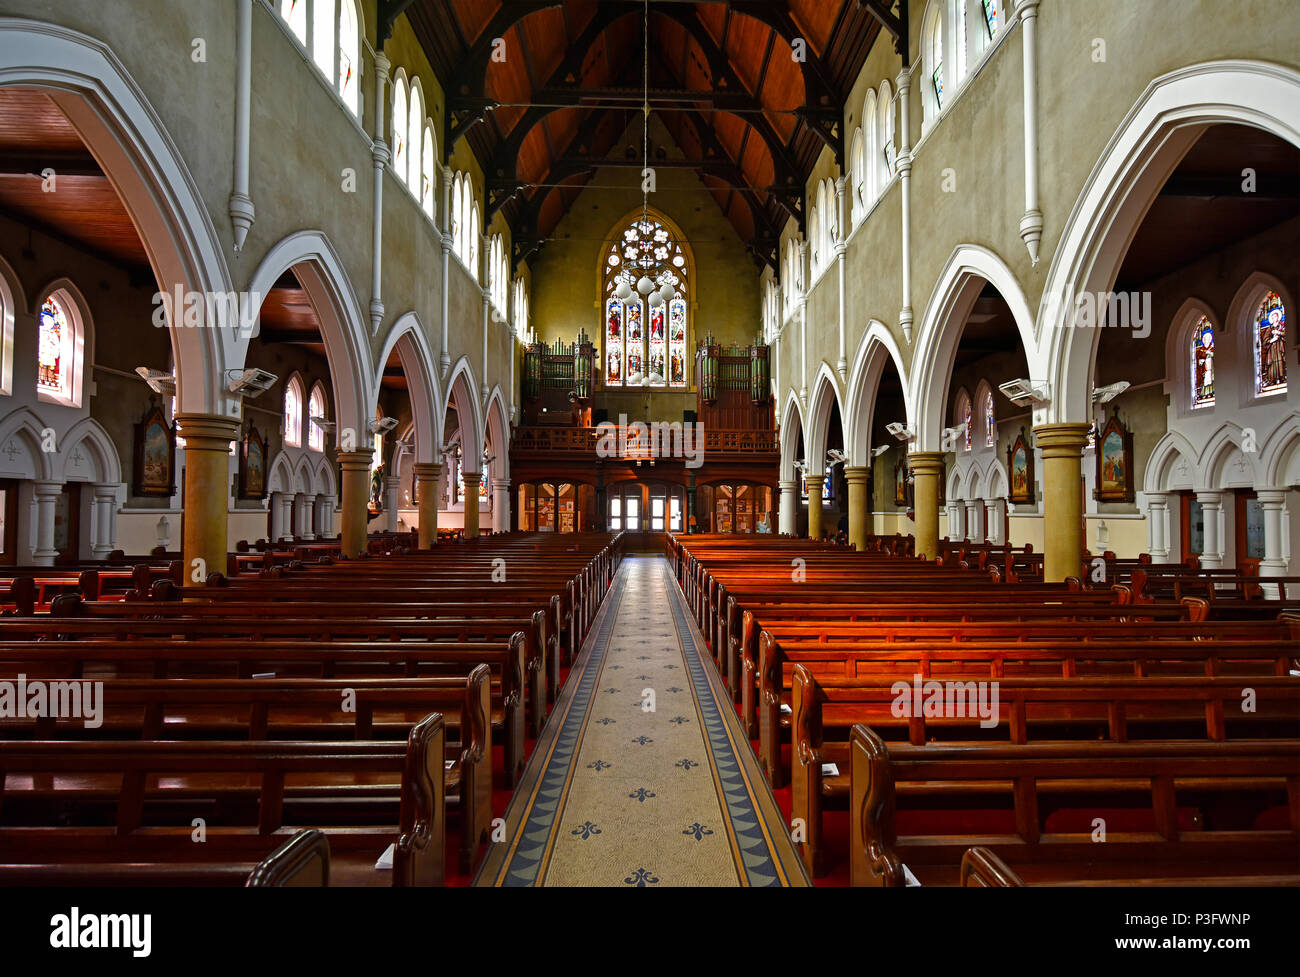 The Interior Of The St Mary And Joseph Catholic Church In